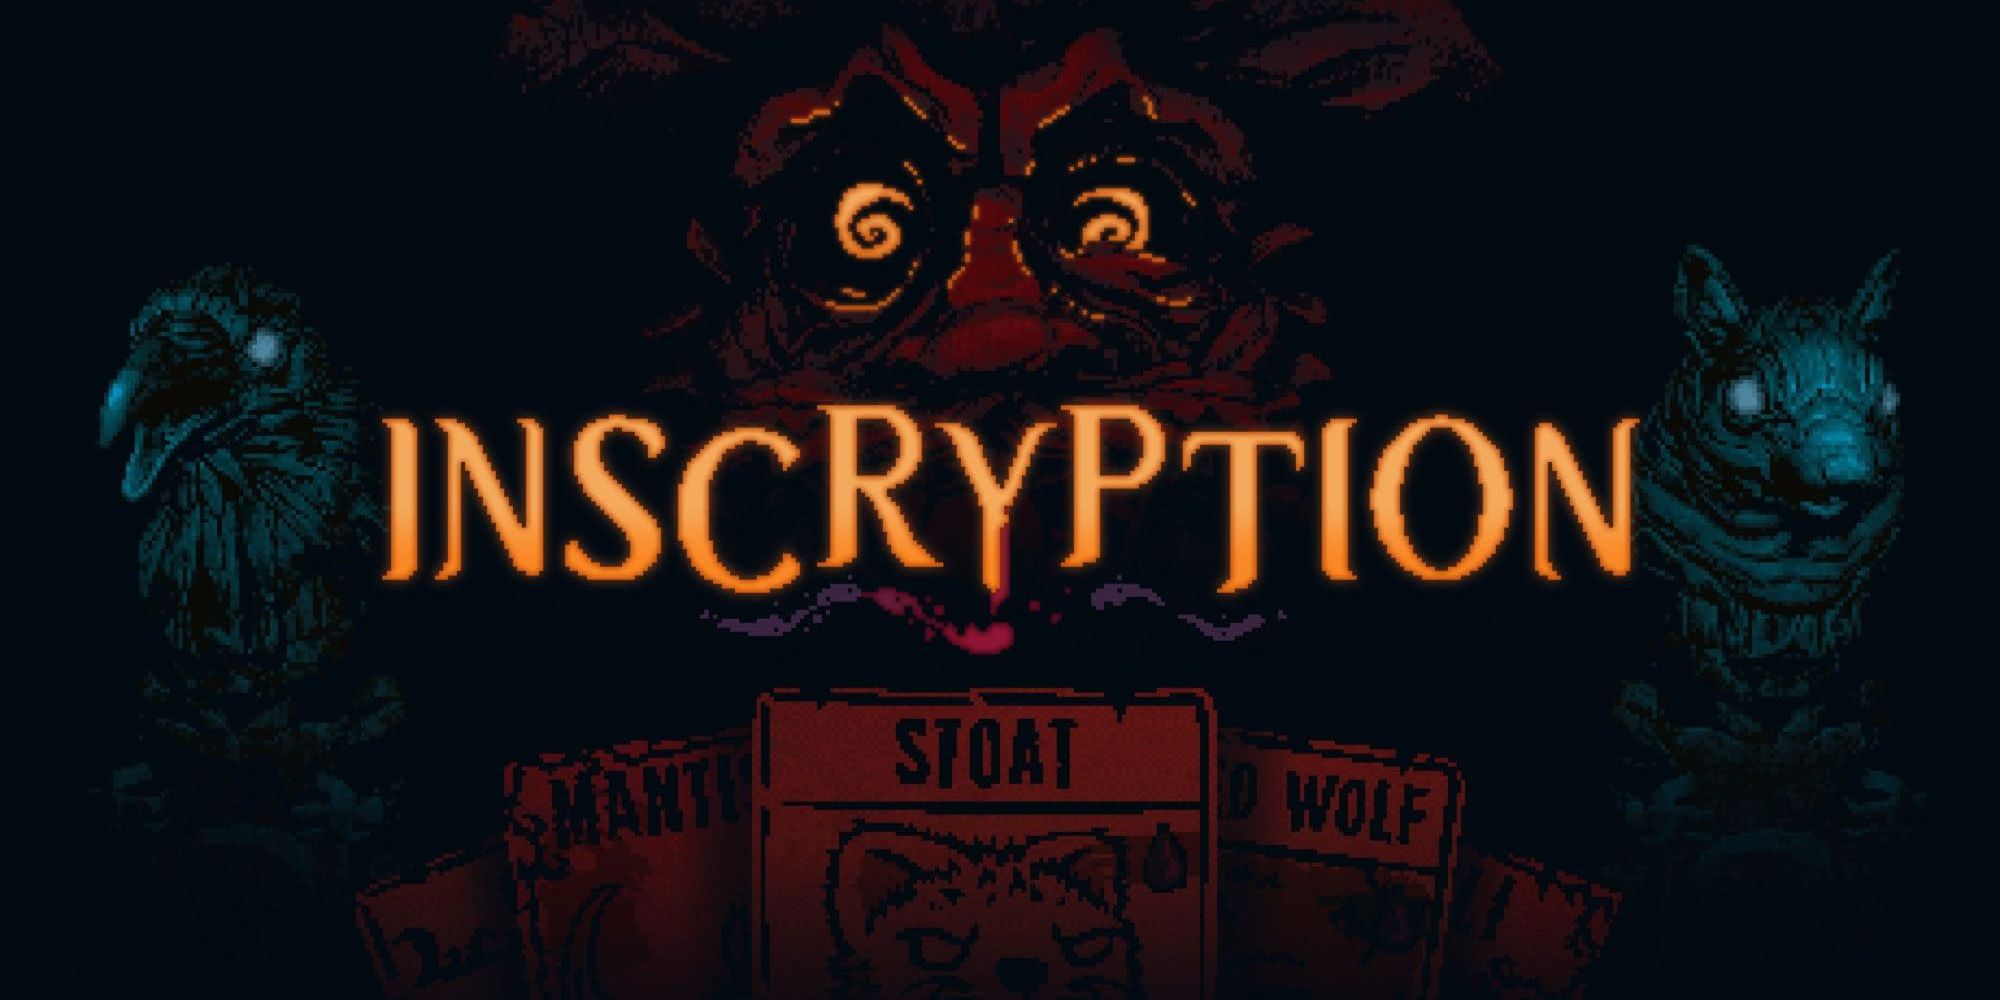 the title logo for Inscryption in font of creepy animals and a face.